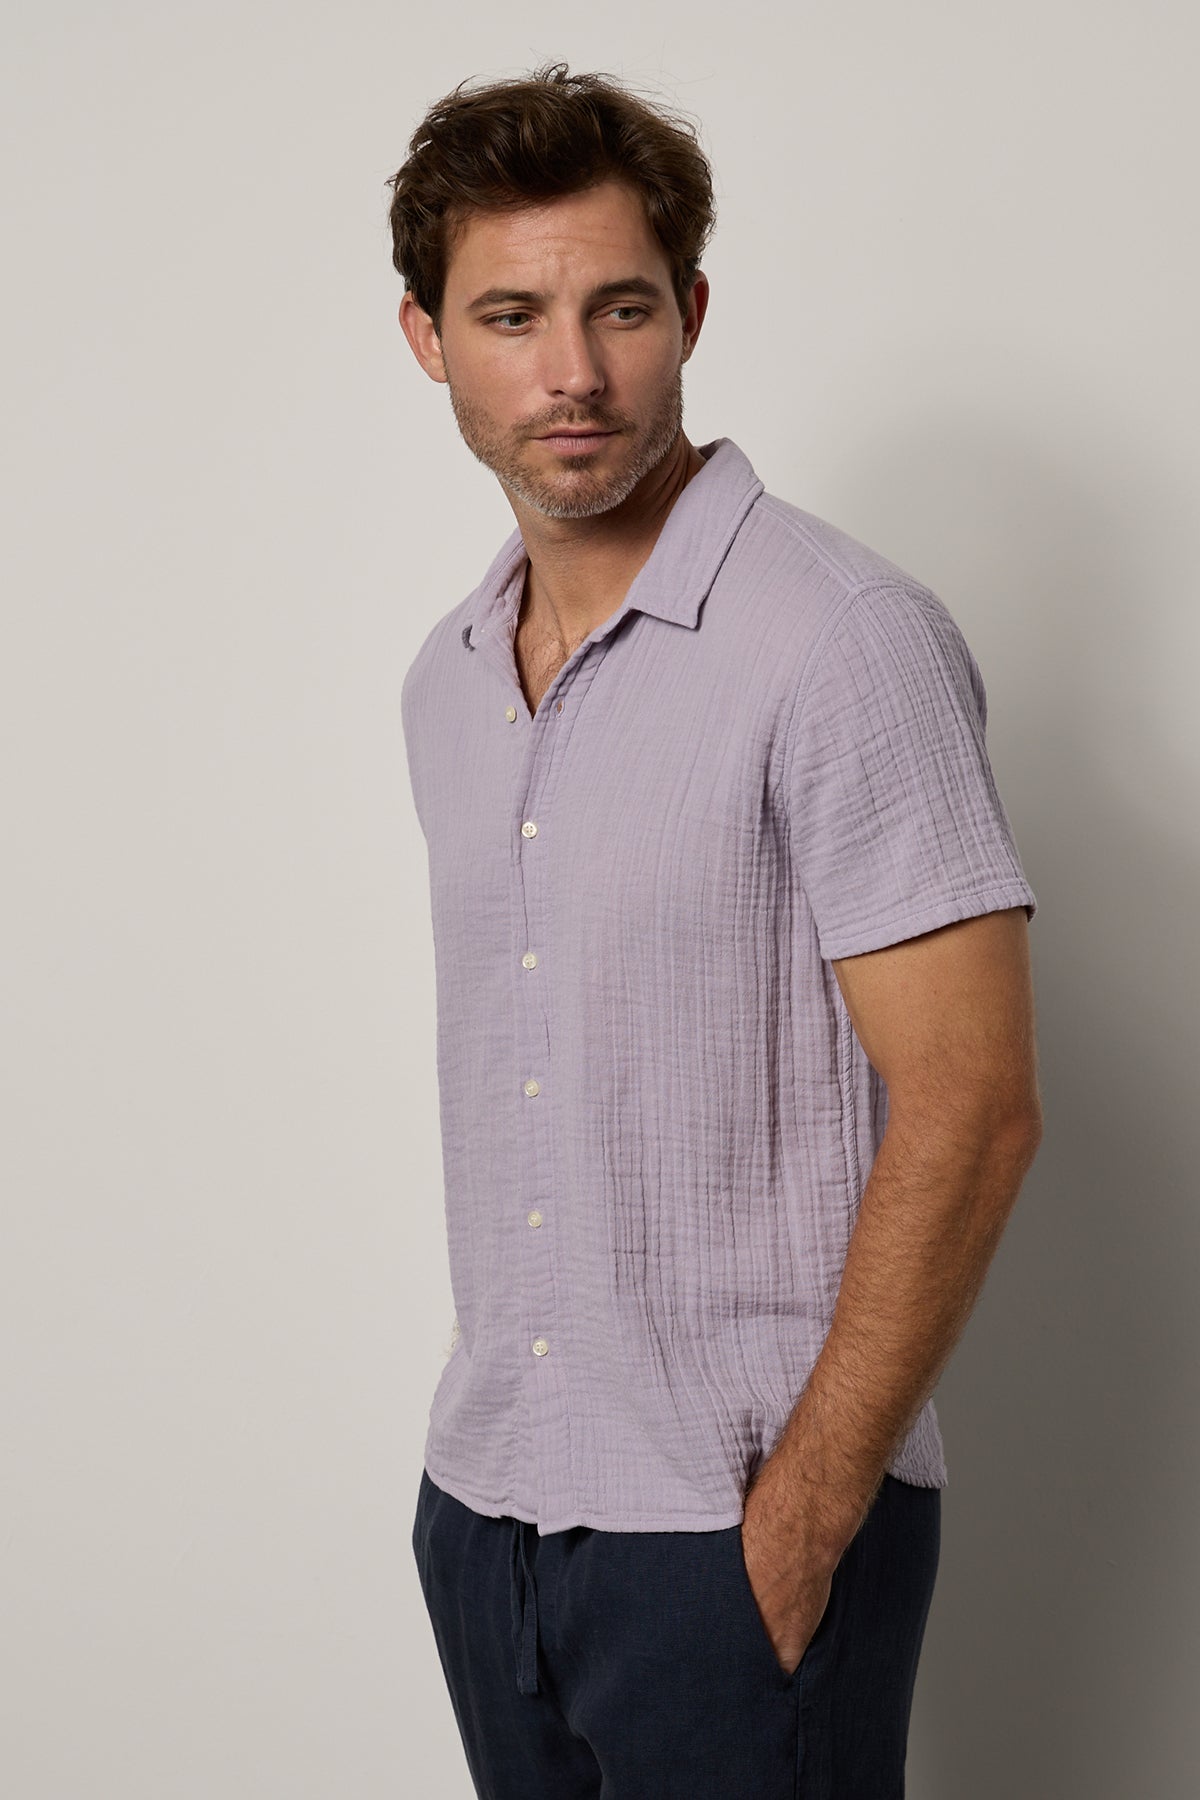   Christian Shirt in lilac with Vann pants in navy side & front model with hand in pants pocket 